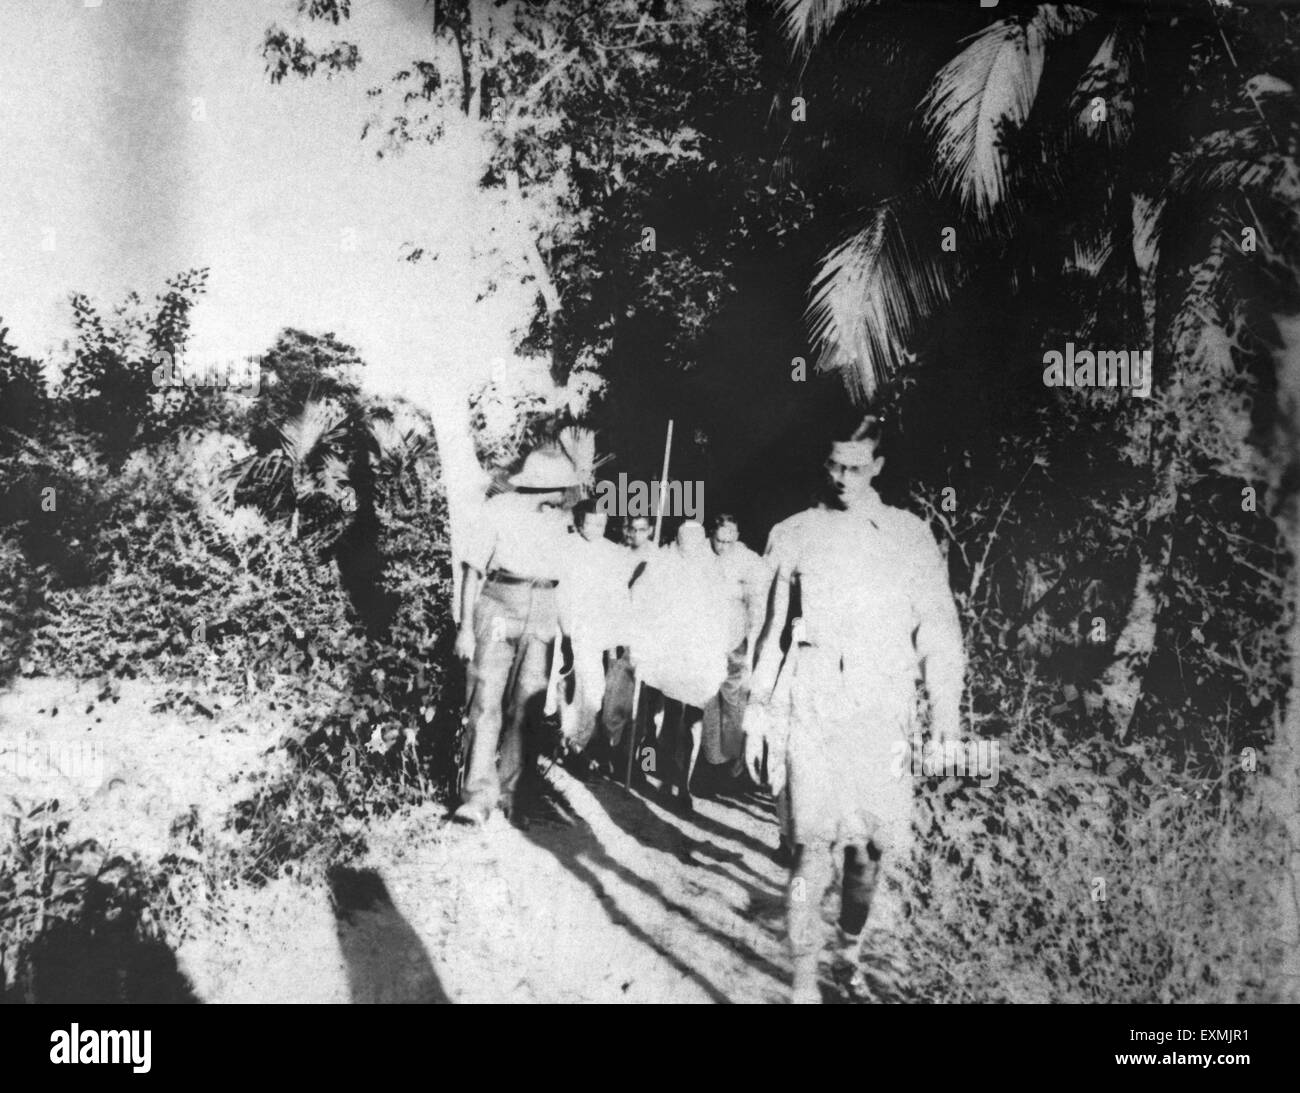 Mahatma Gandhi and his party on their way to another riot effected village in Noakhali ; November 1946 ; India NO MR Stock Photo